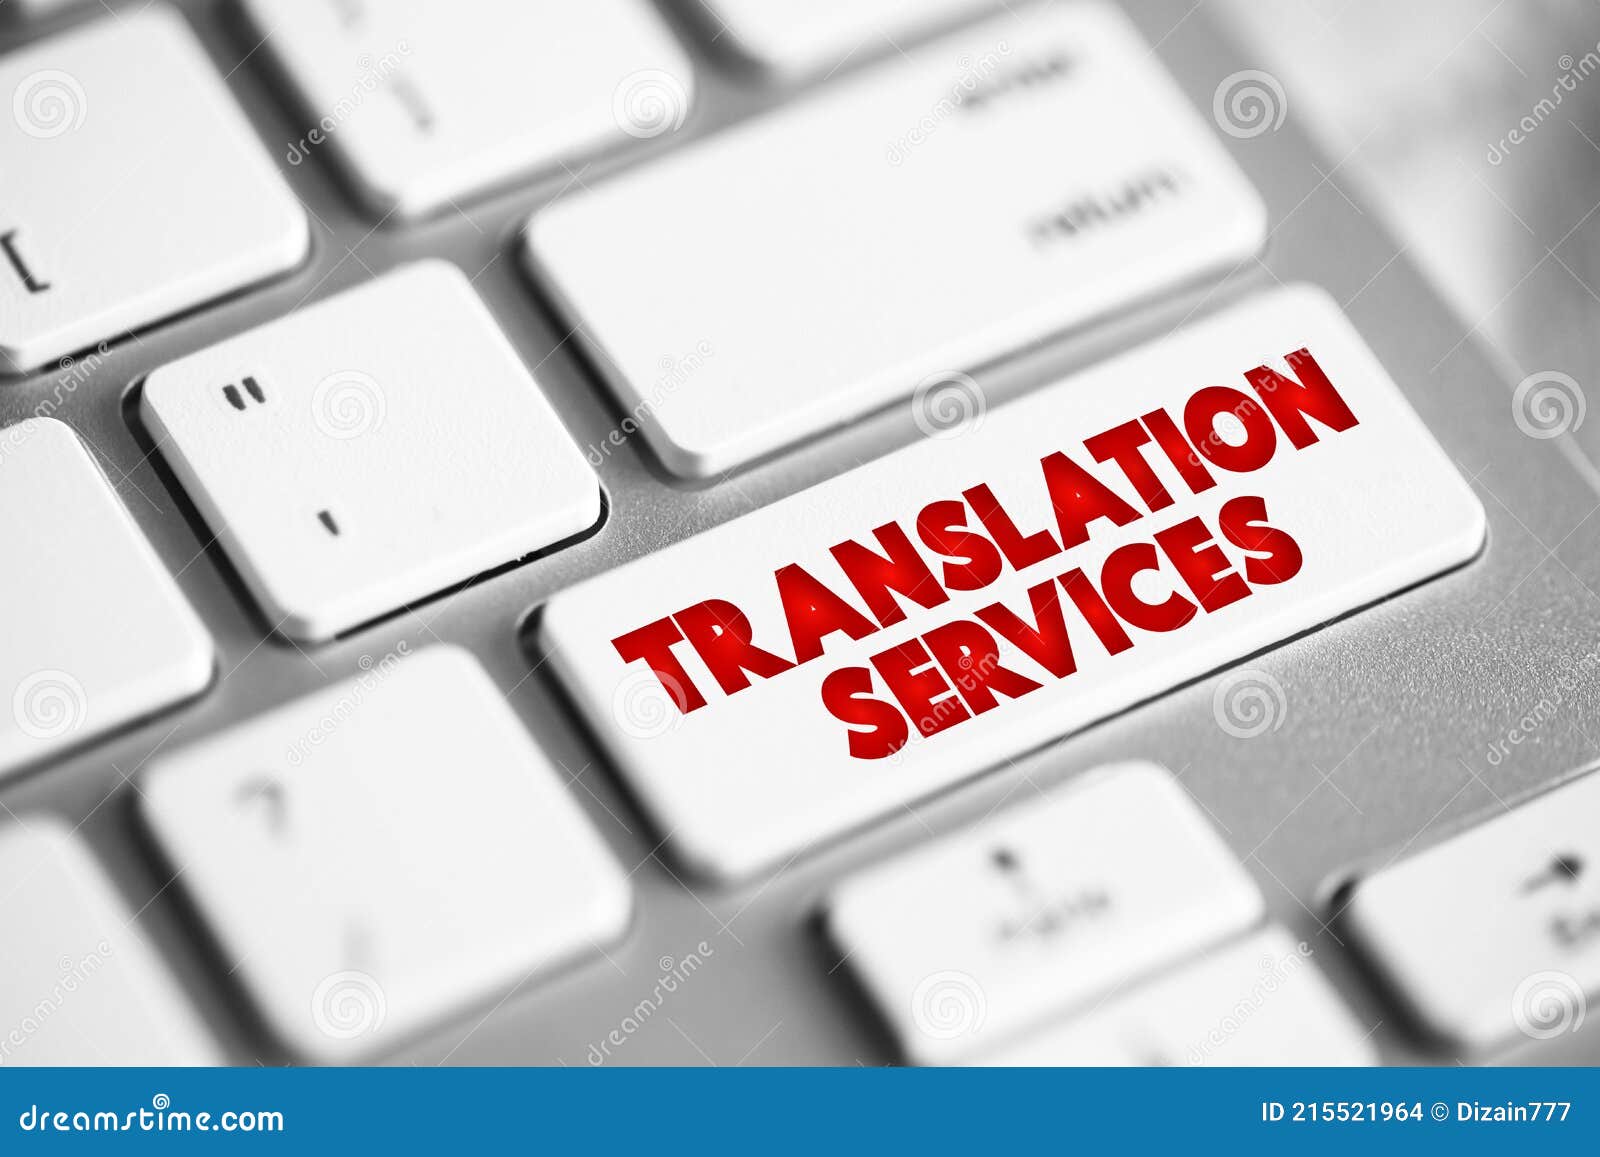 translation services button on keyboard, business concept background